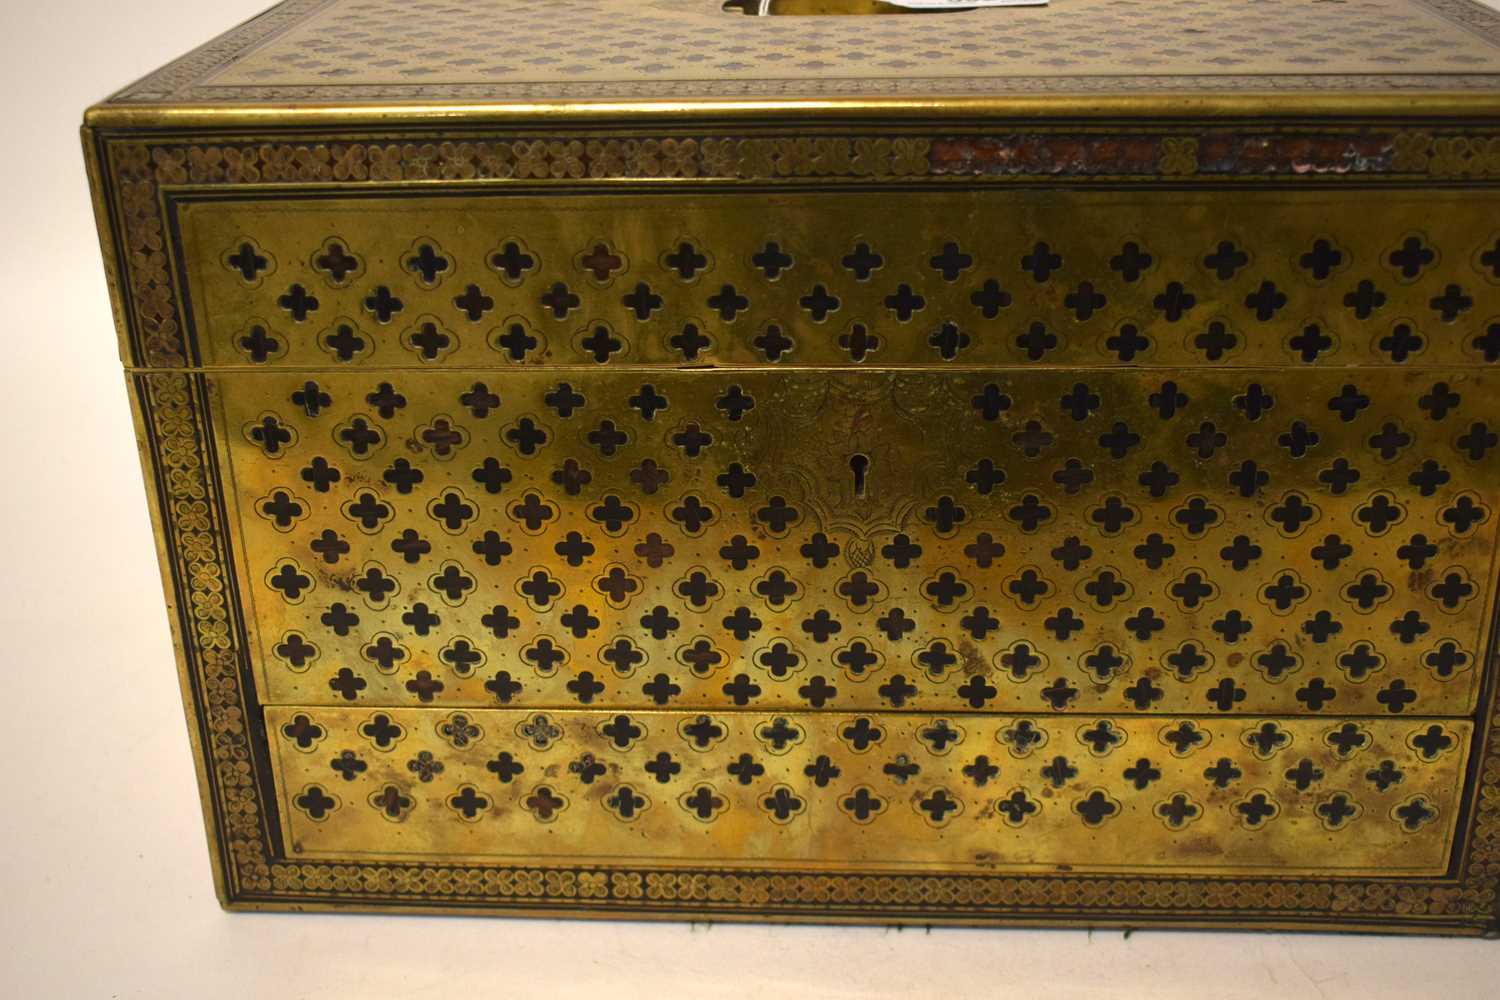 A FINE EARLY 19TH CENTURY FRENCH BRONZE OVERLAID WOOD CASKET with fully fitted silver interior, - Image 7 of 23